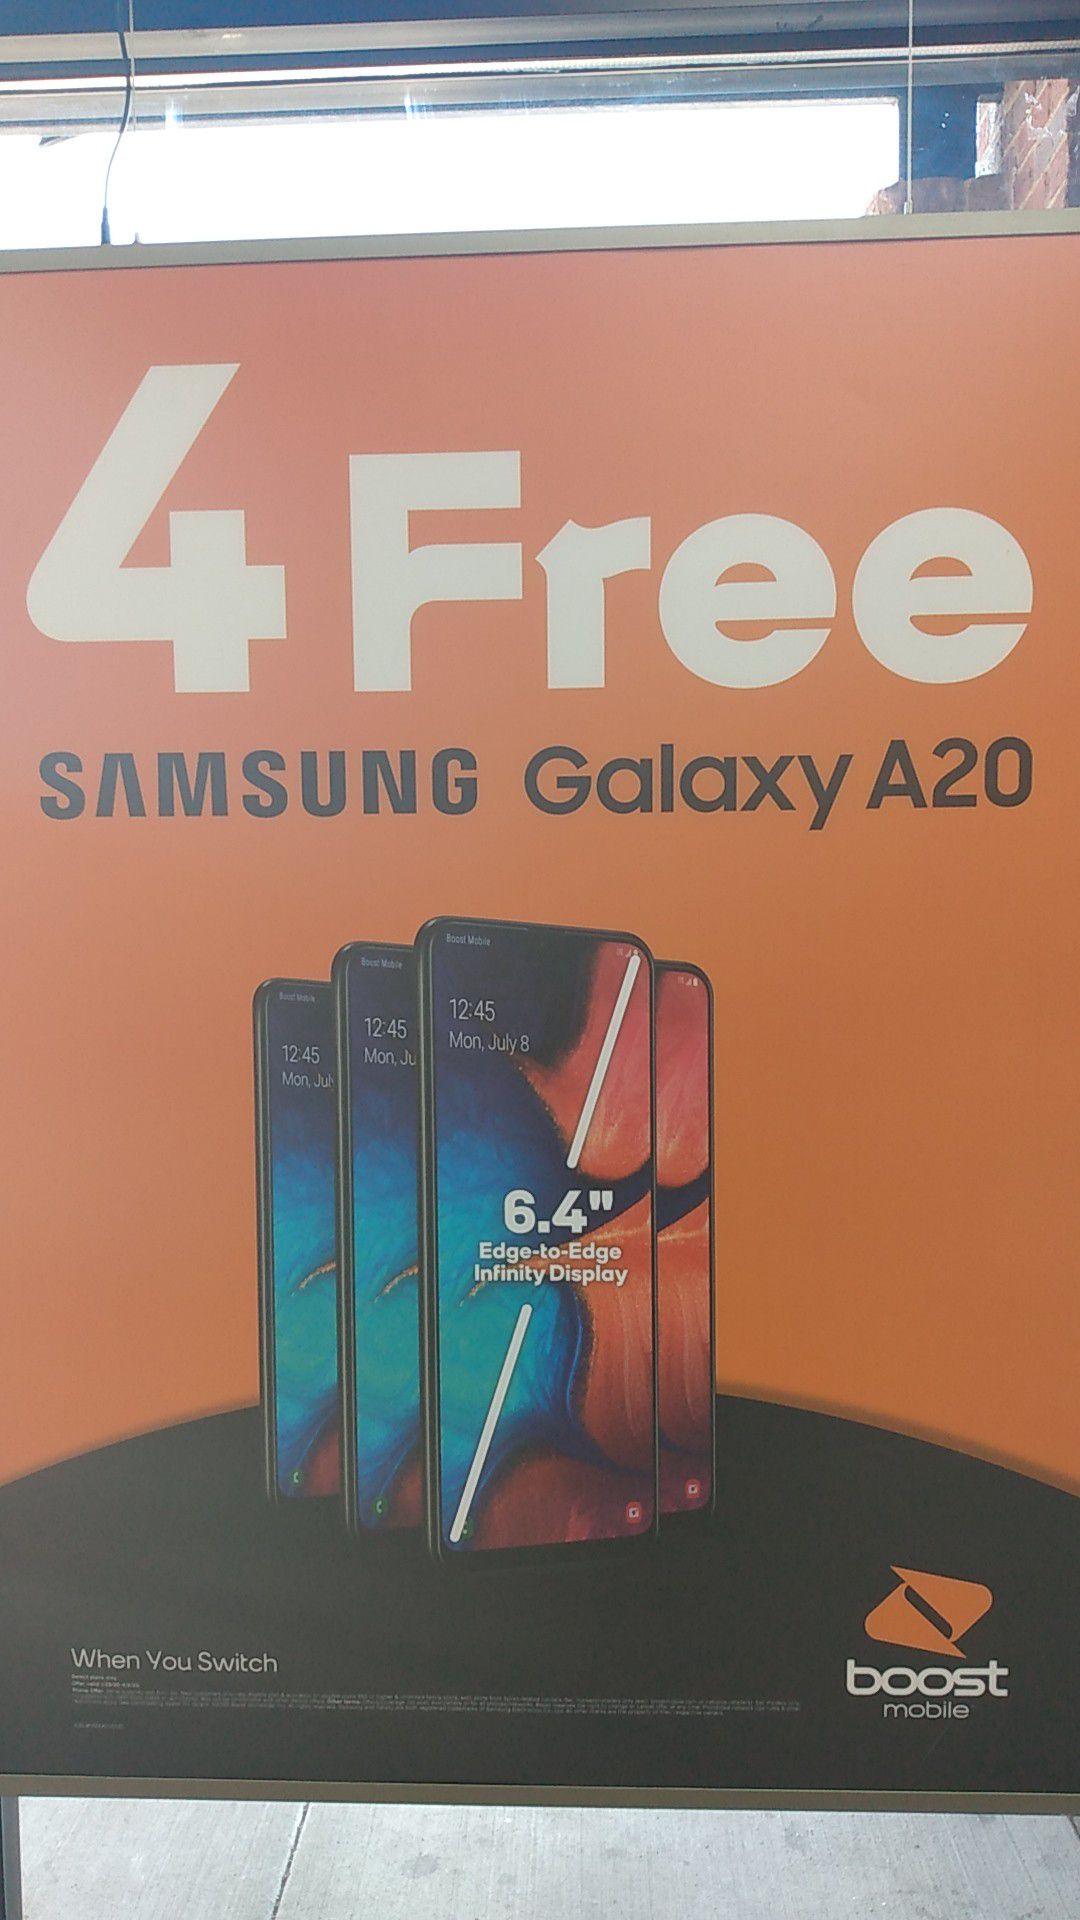 Get a free Samsung Galaxy A20 when you switch to Boost Mobile! "Buy" one for free with port in, get one for free!